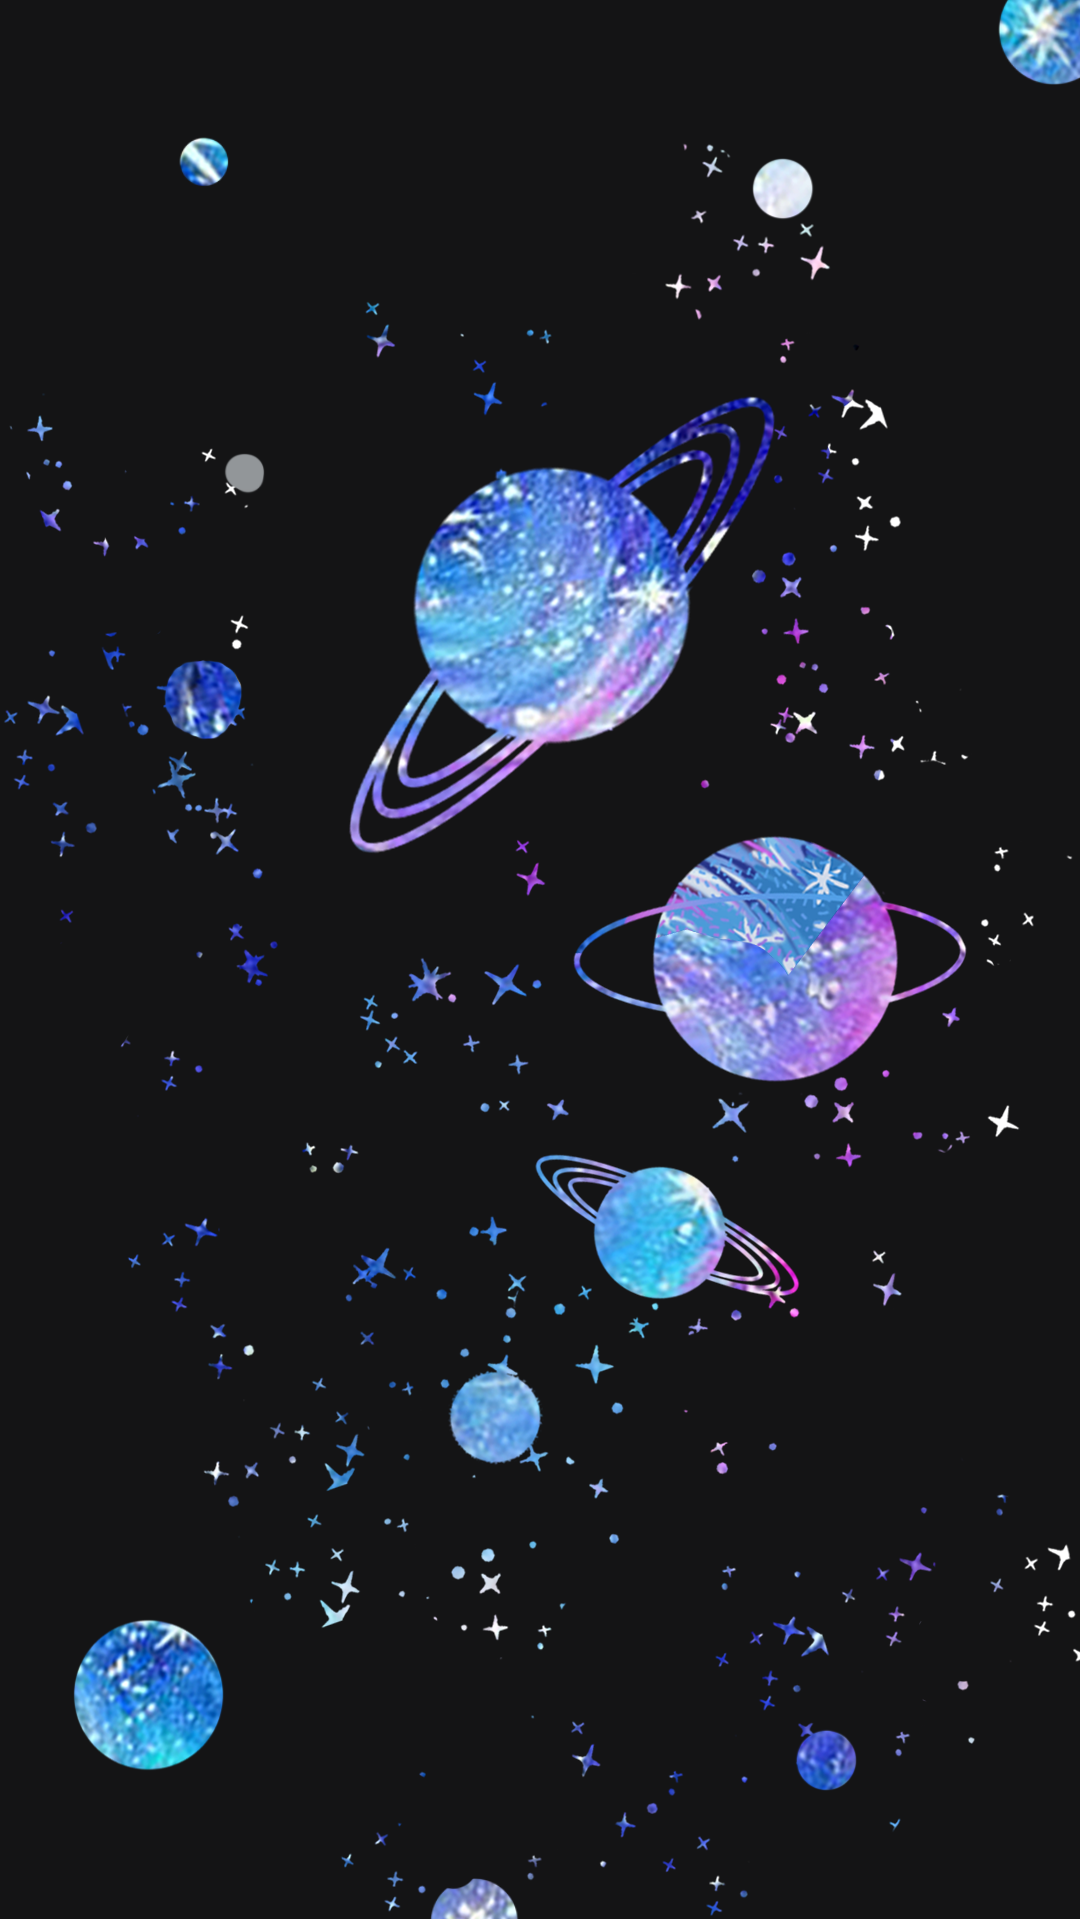 Share 94 iphone aesthetic galaxy wallpaper latest  incdgdbentre